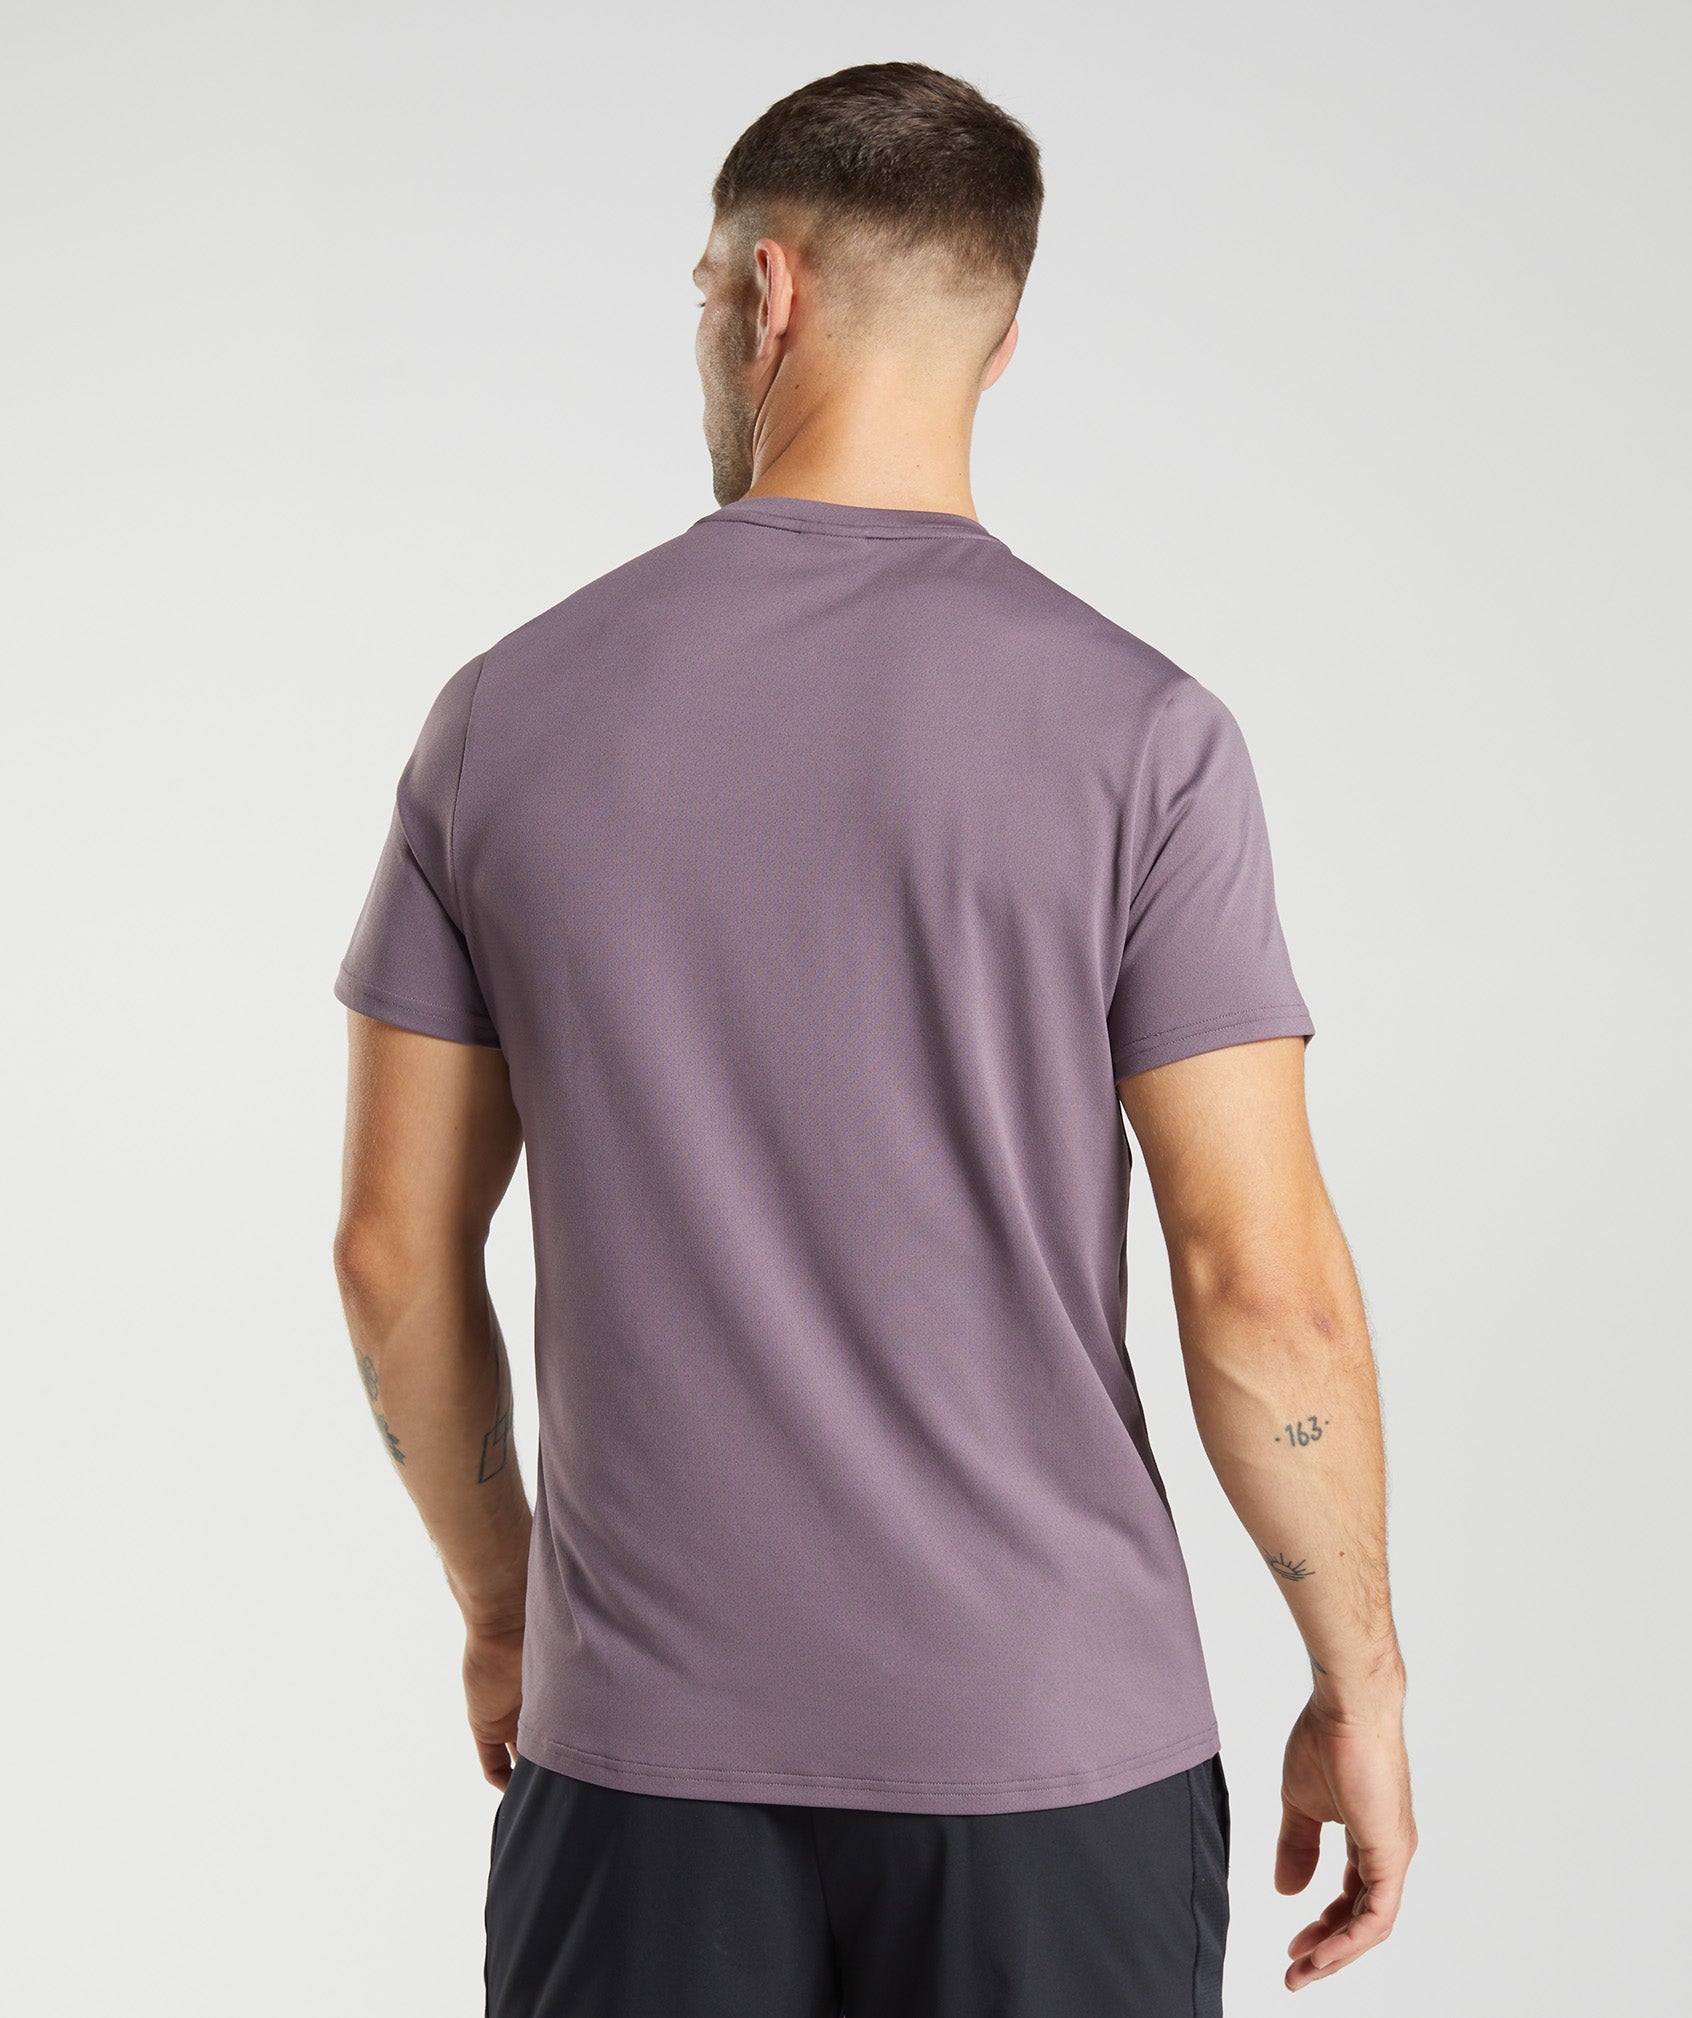 Arrival T-Shirt in Musk Lilac - view 2